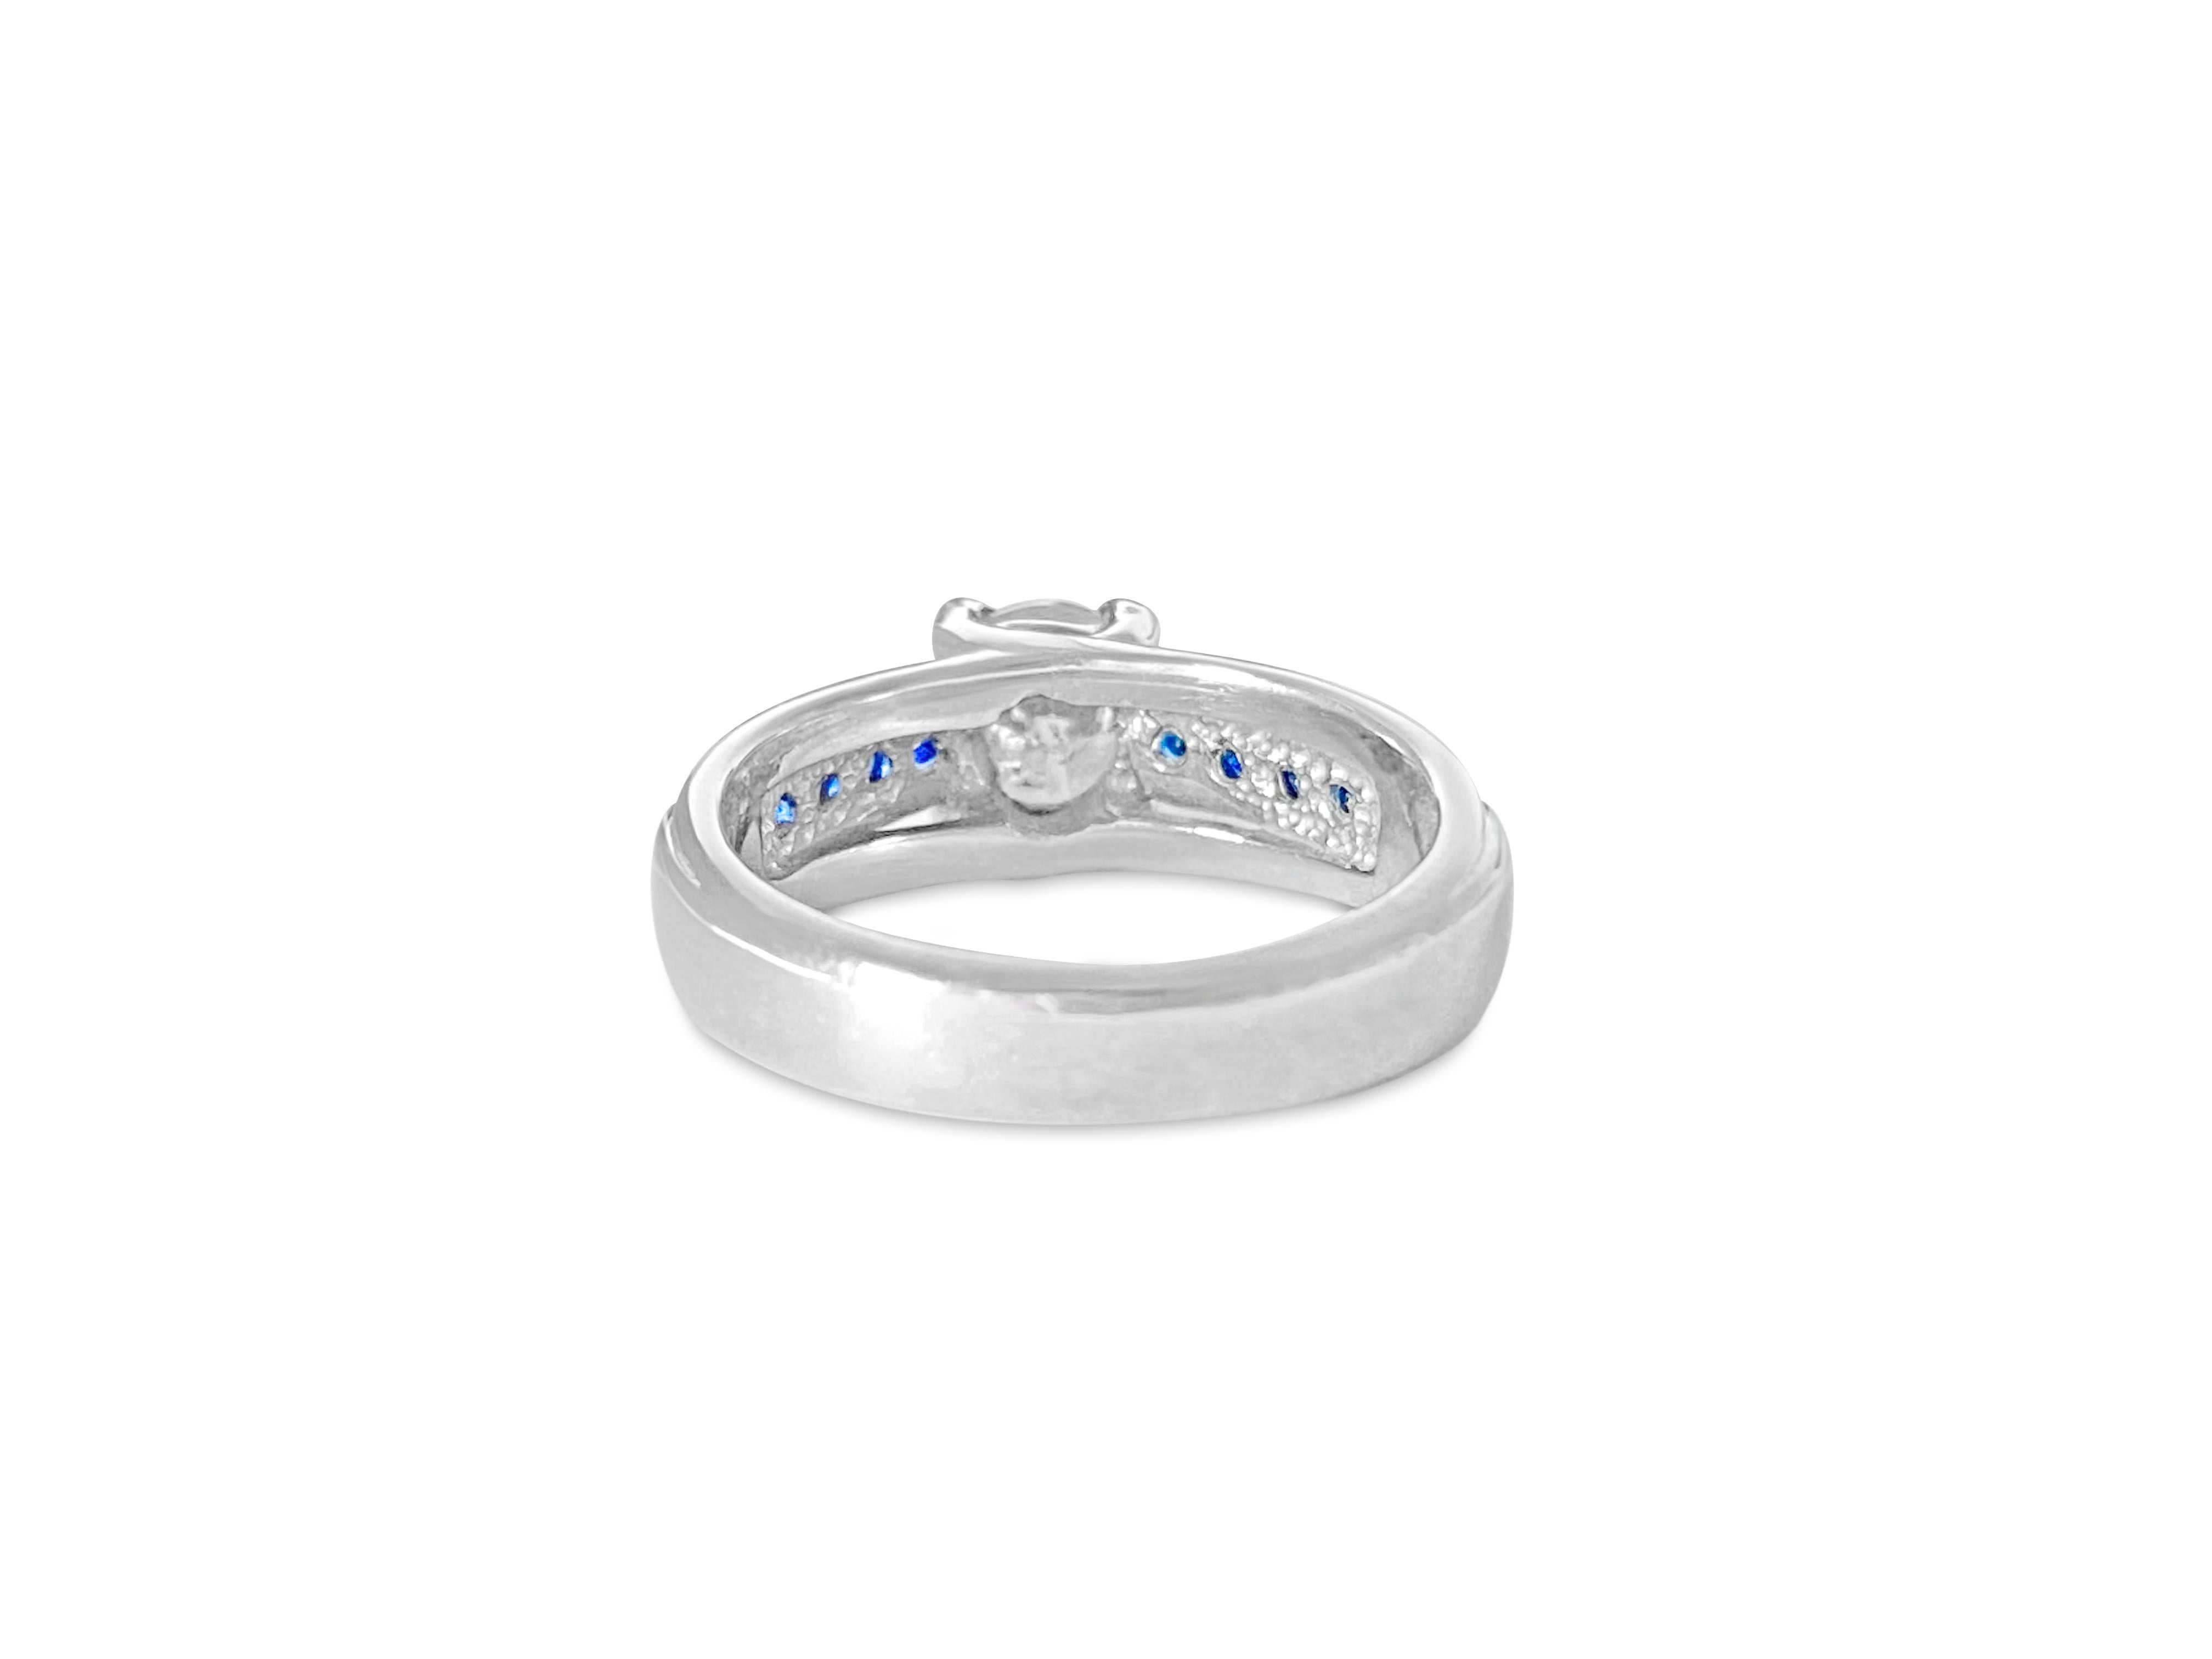 1.70 Carat Diamond and Blue Sapphire Engagement Ring in 18 Karat White Gold For Sale 1